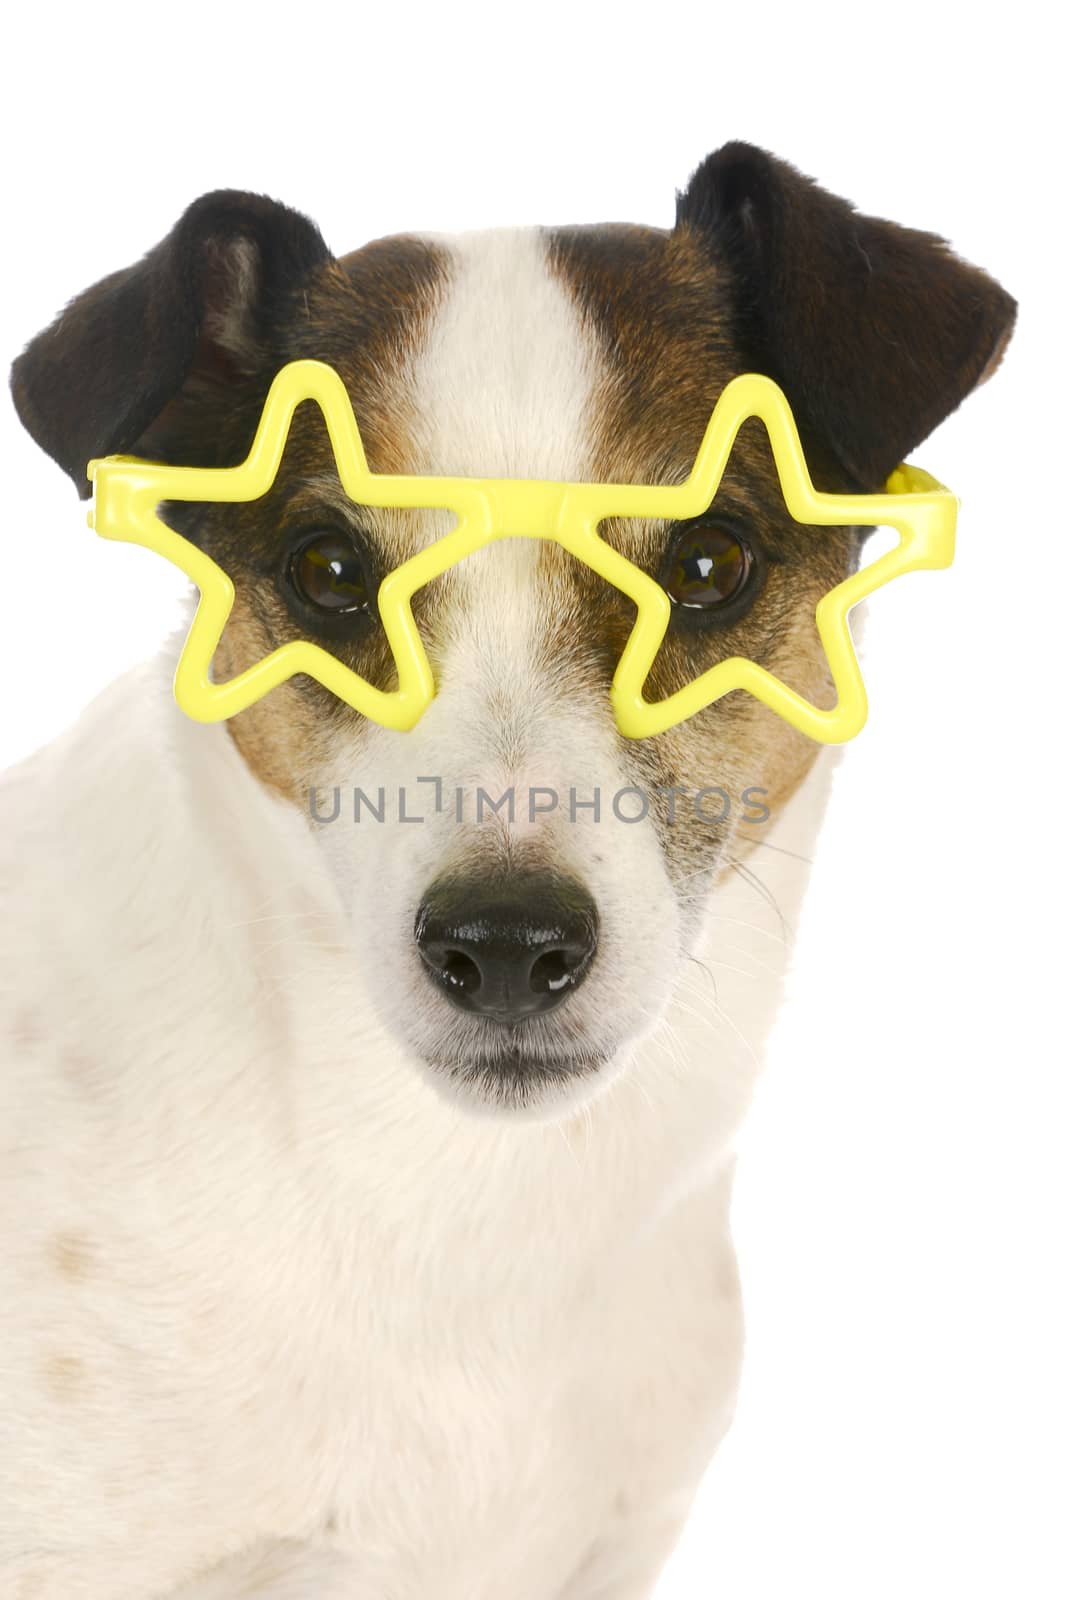 famous dog - jack russel terrier wearing yellow star shaped glasses on white background